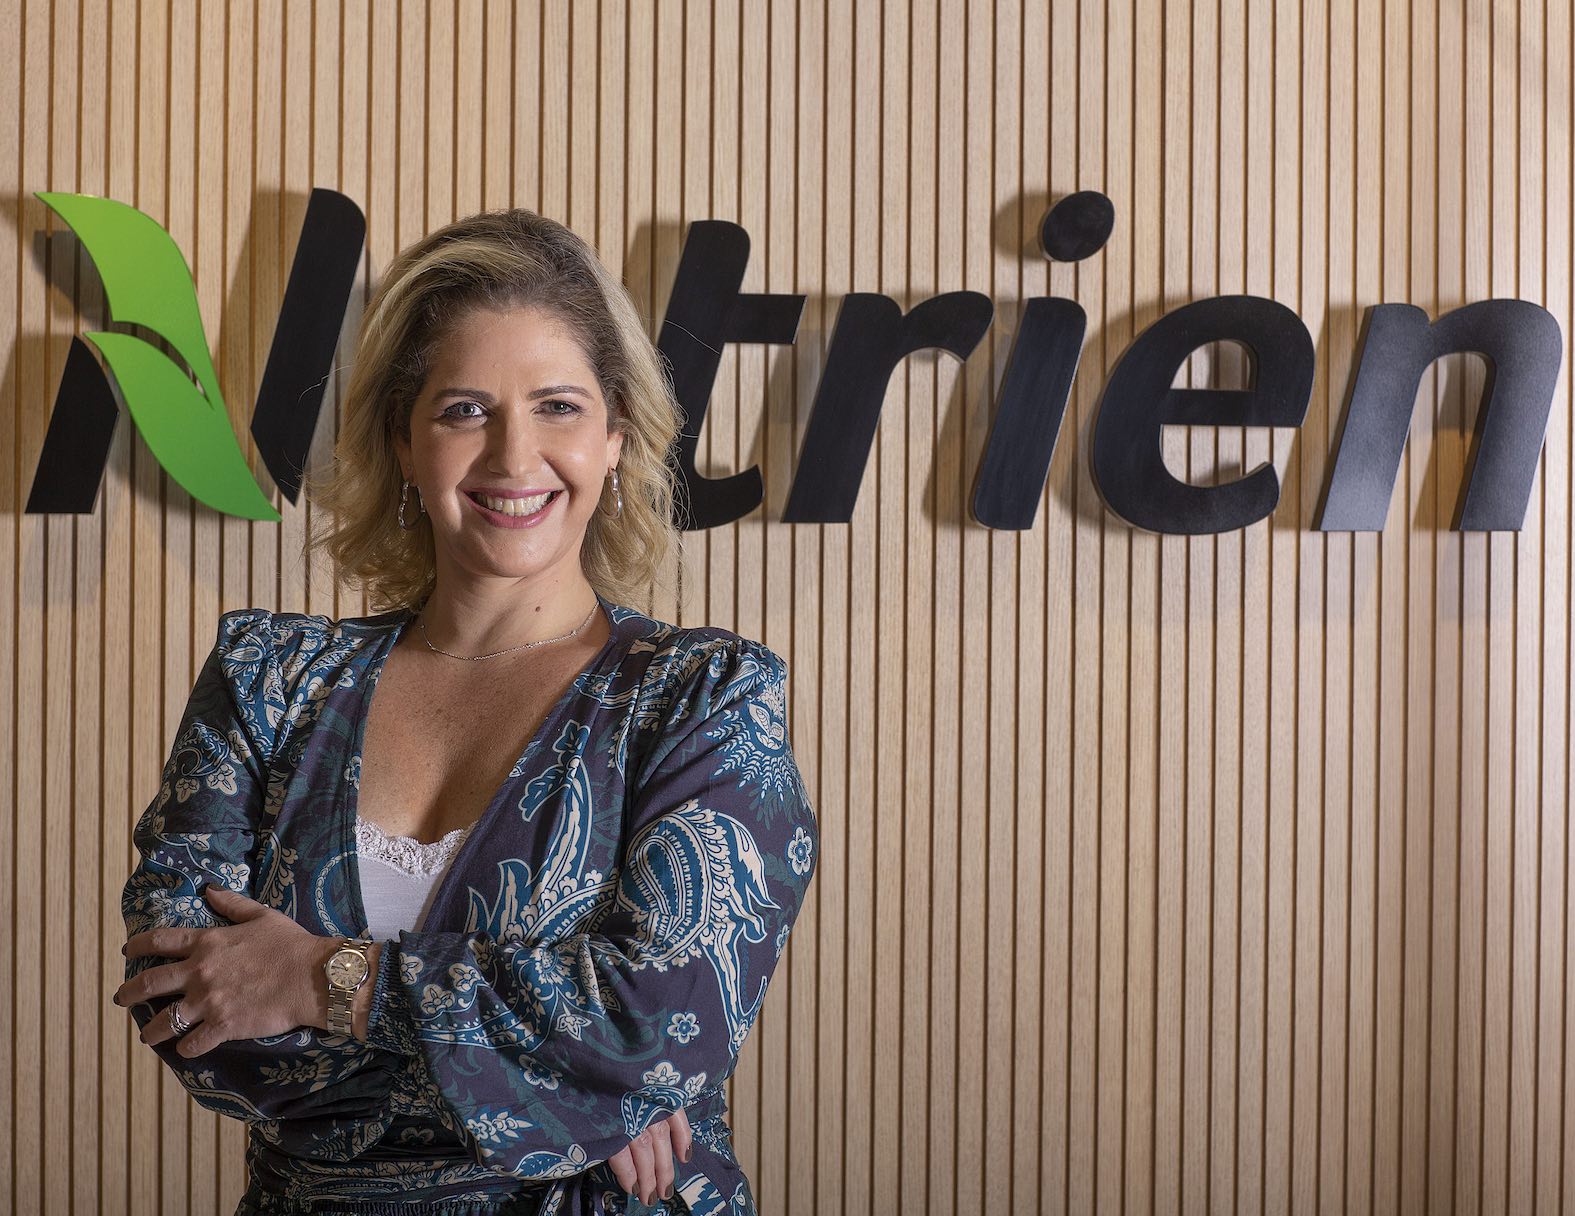 Nutrien launches first internship program with 50 vacancies for the agribusiness and corporate areas